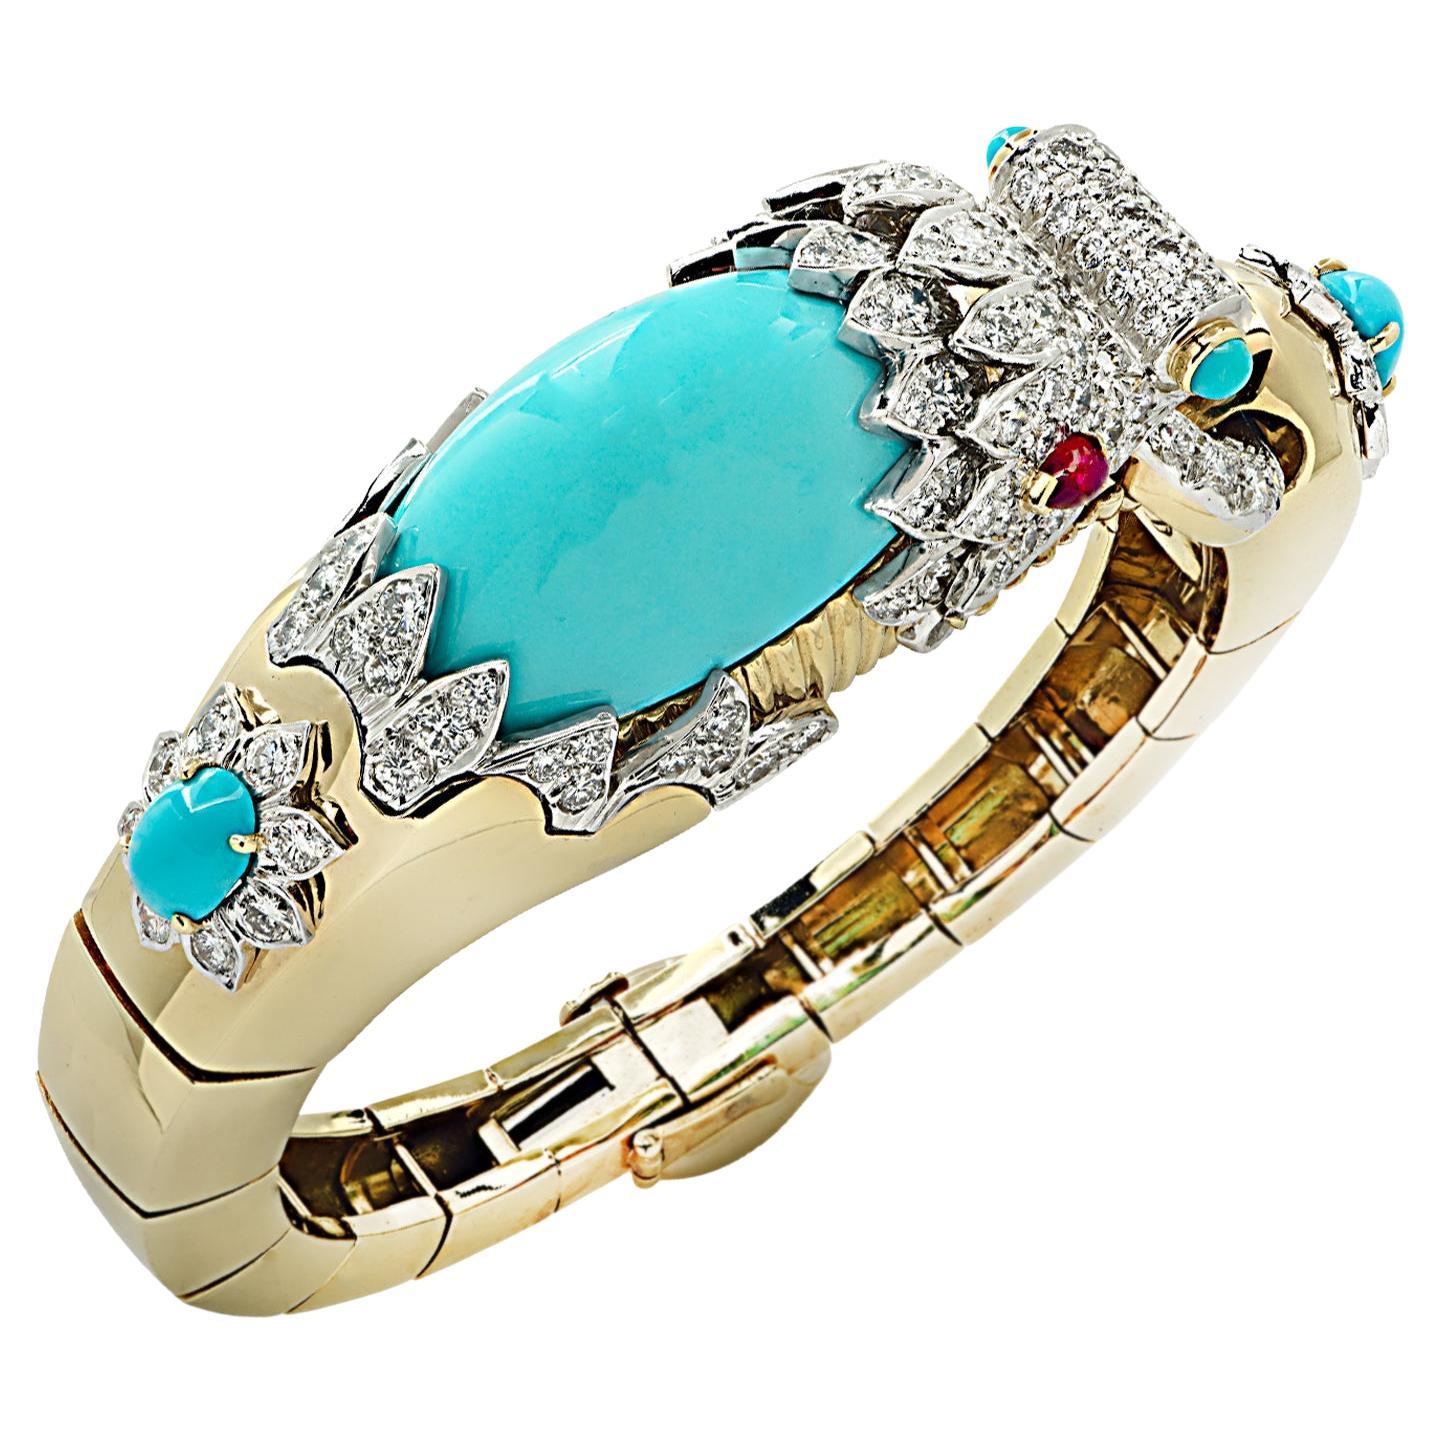 From David Webb’s iconic Kingdom collection, this exquisite Turquoise and Diamond Chimera bangle bracelet crafted in 18 karat yellow gold and platinum, with oval Turquoise cabochons, ruby eyes and 151 round brilliant cut diamonds weighing